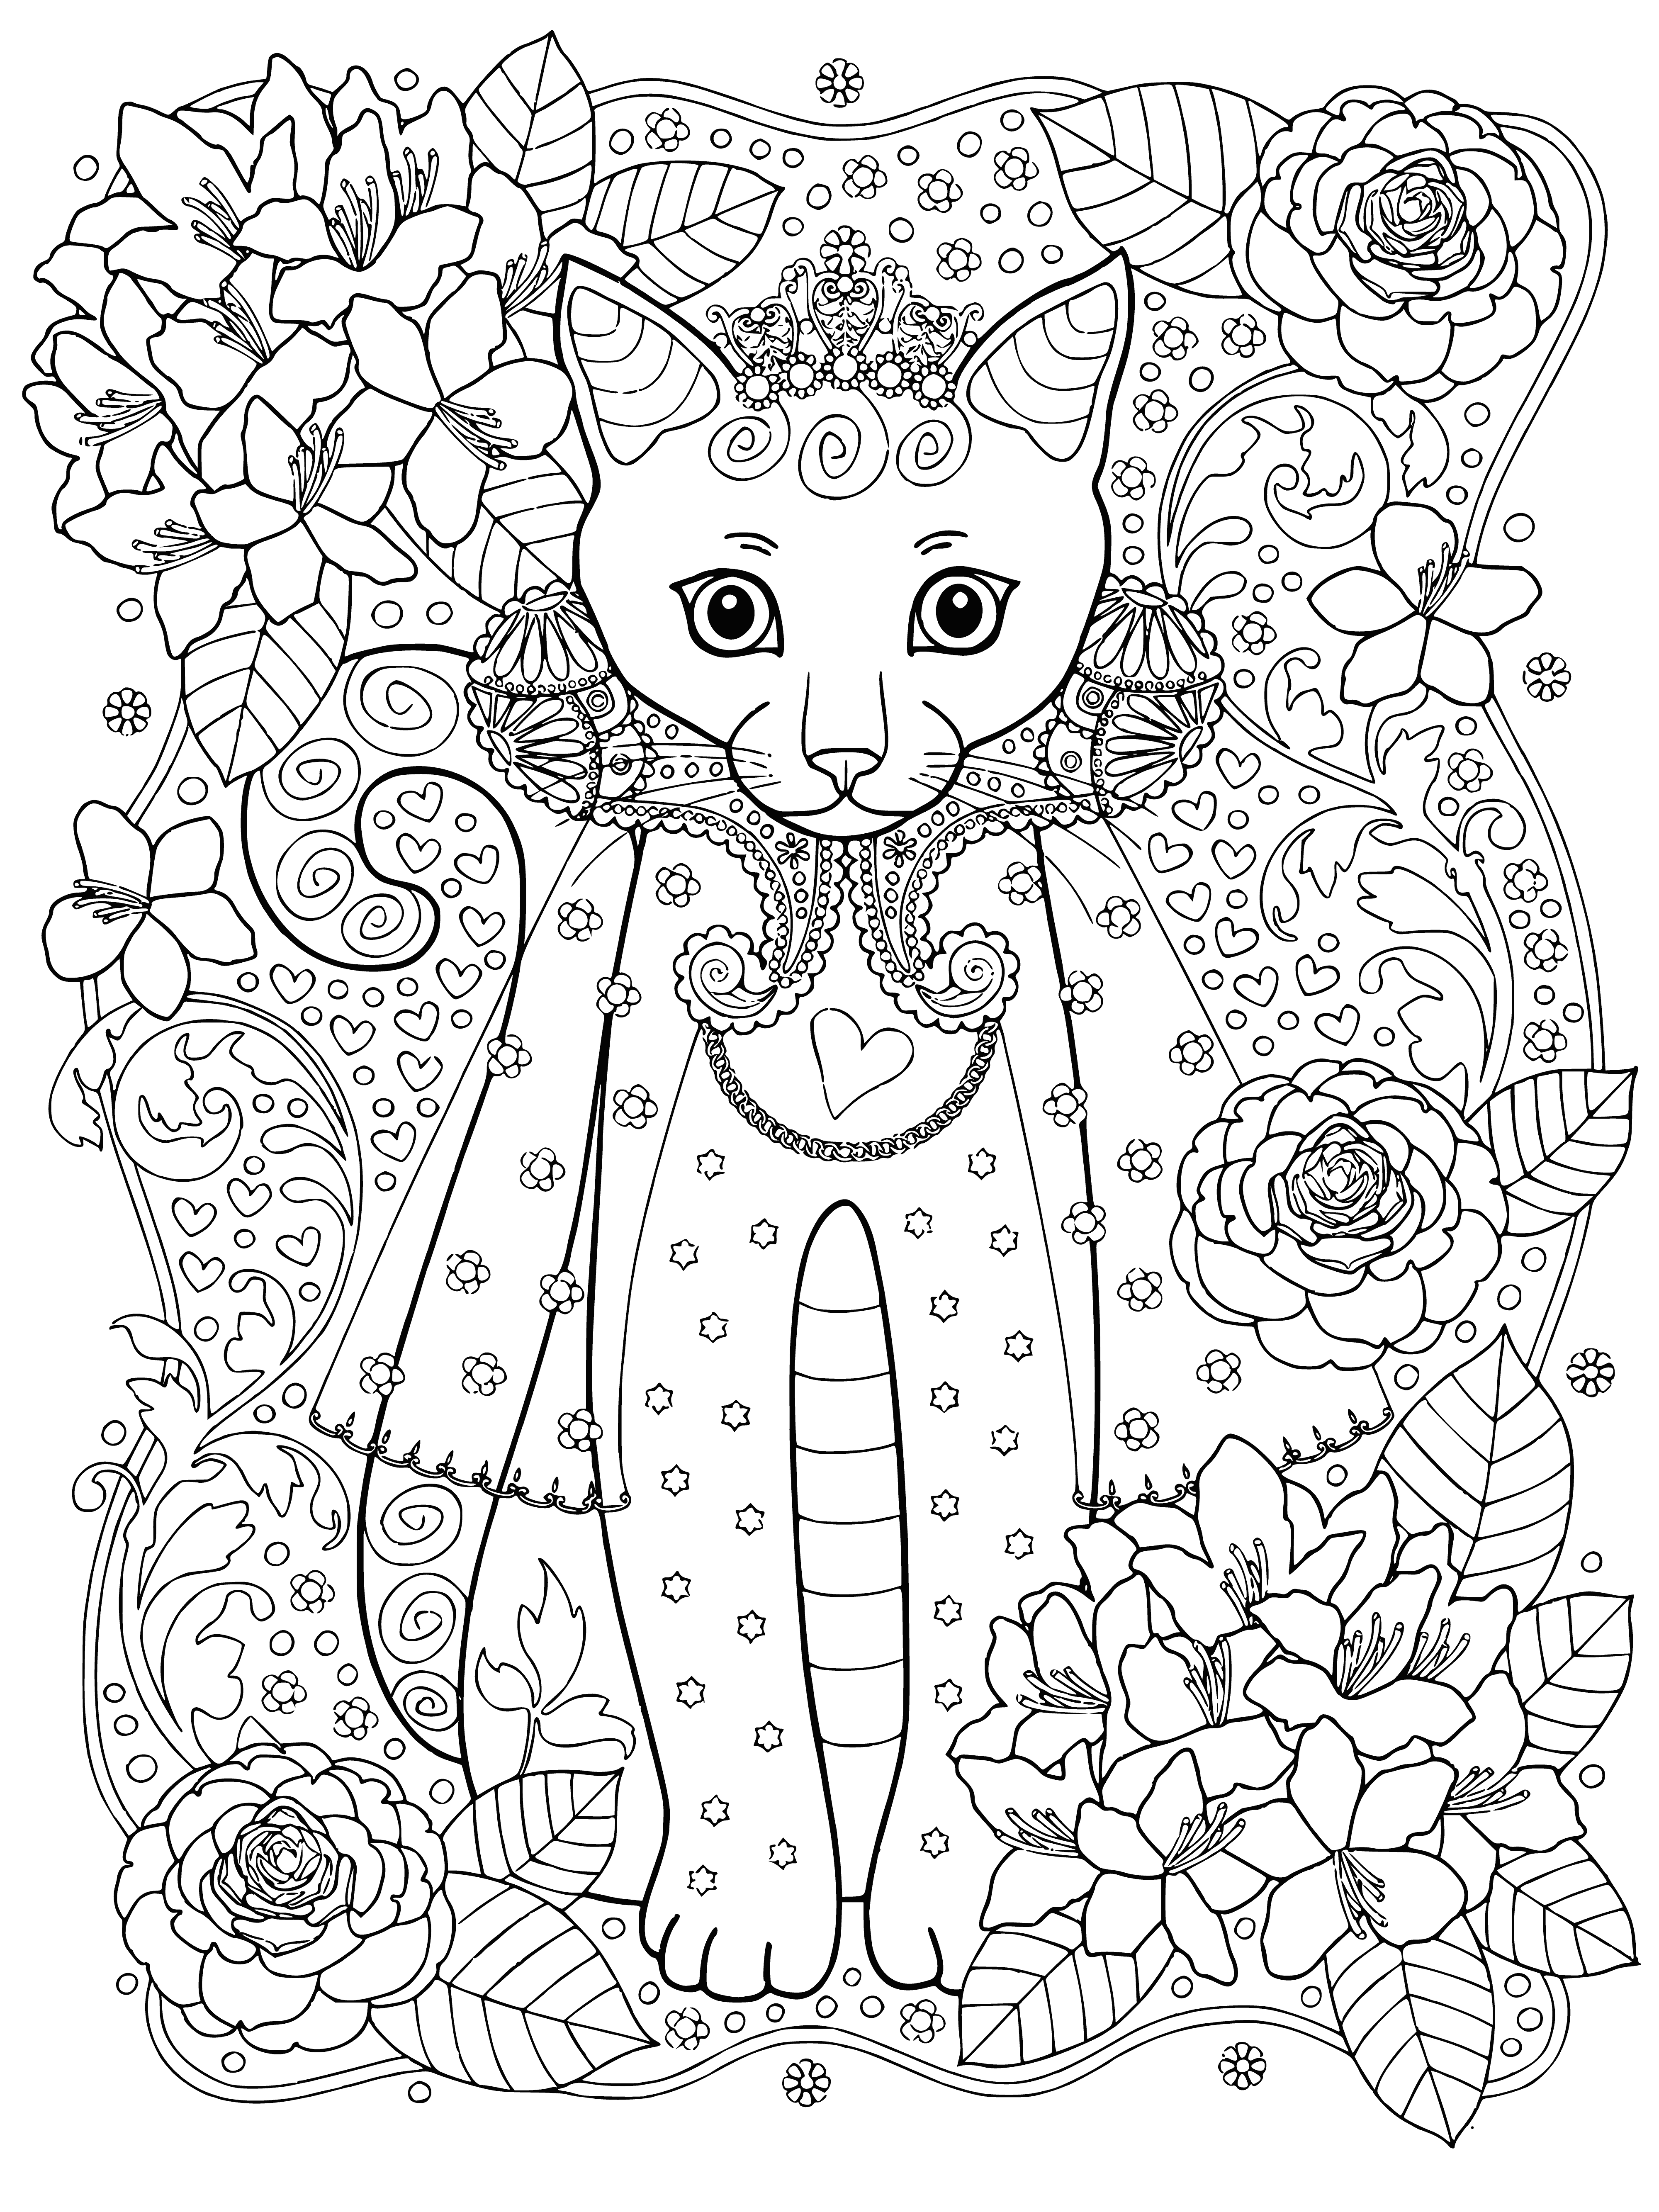 coloring page: A regal cat with a gemstone necklace stares confidently at the viewer, a paw raised as if ready to step into the shadowy outline of a castle.